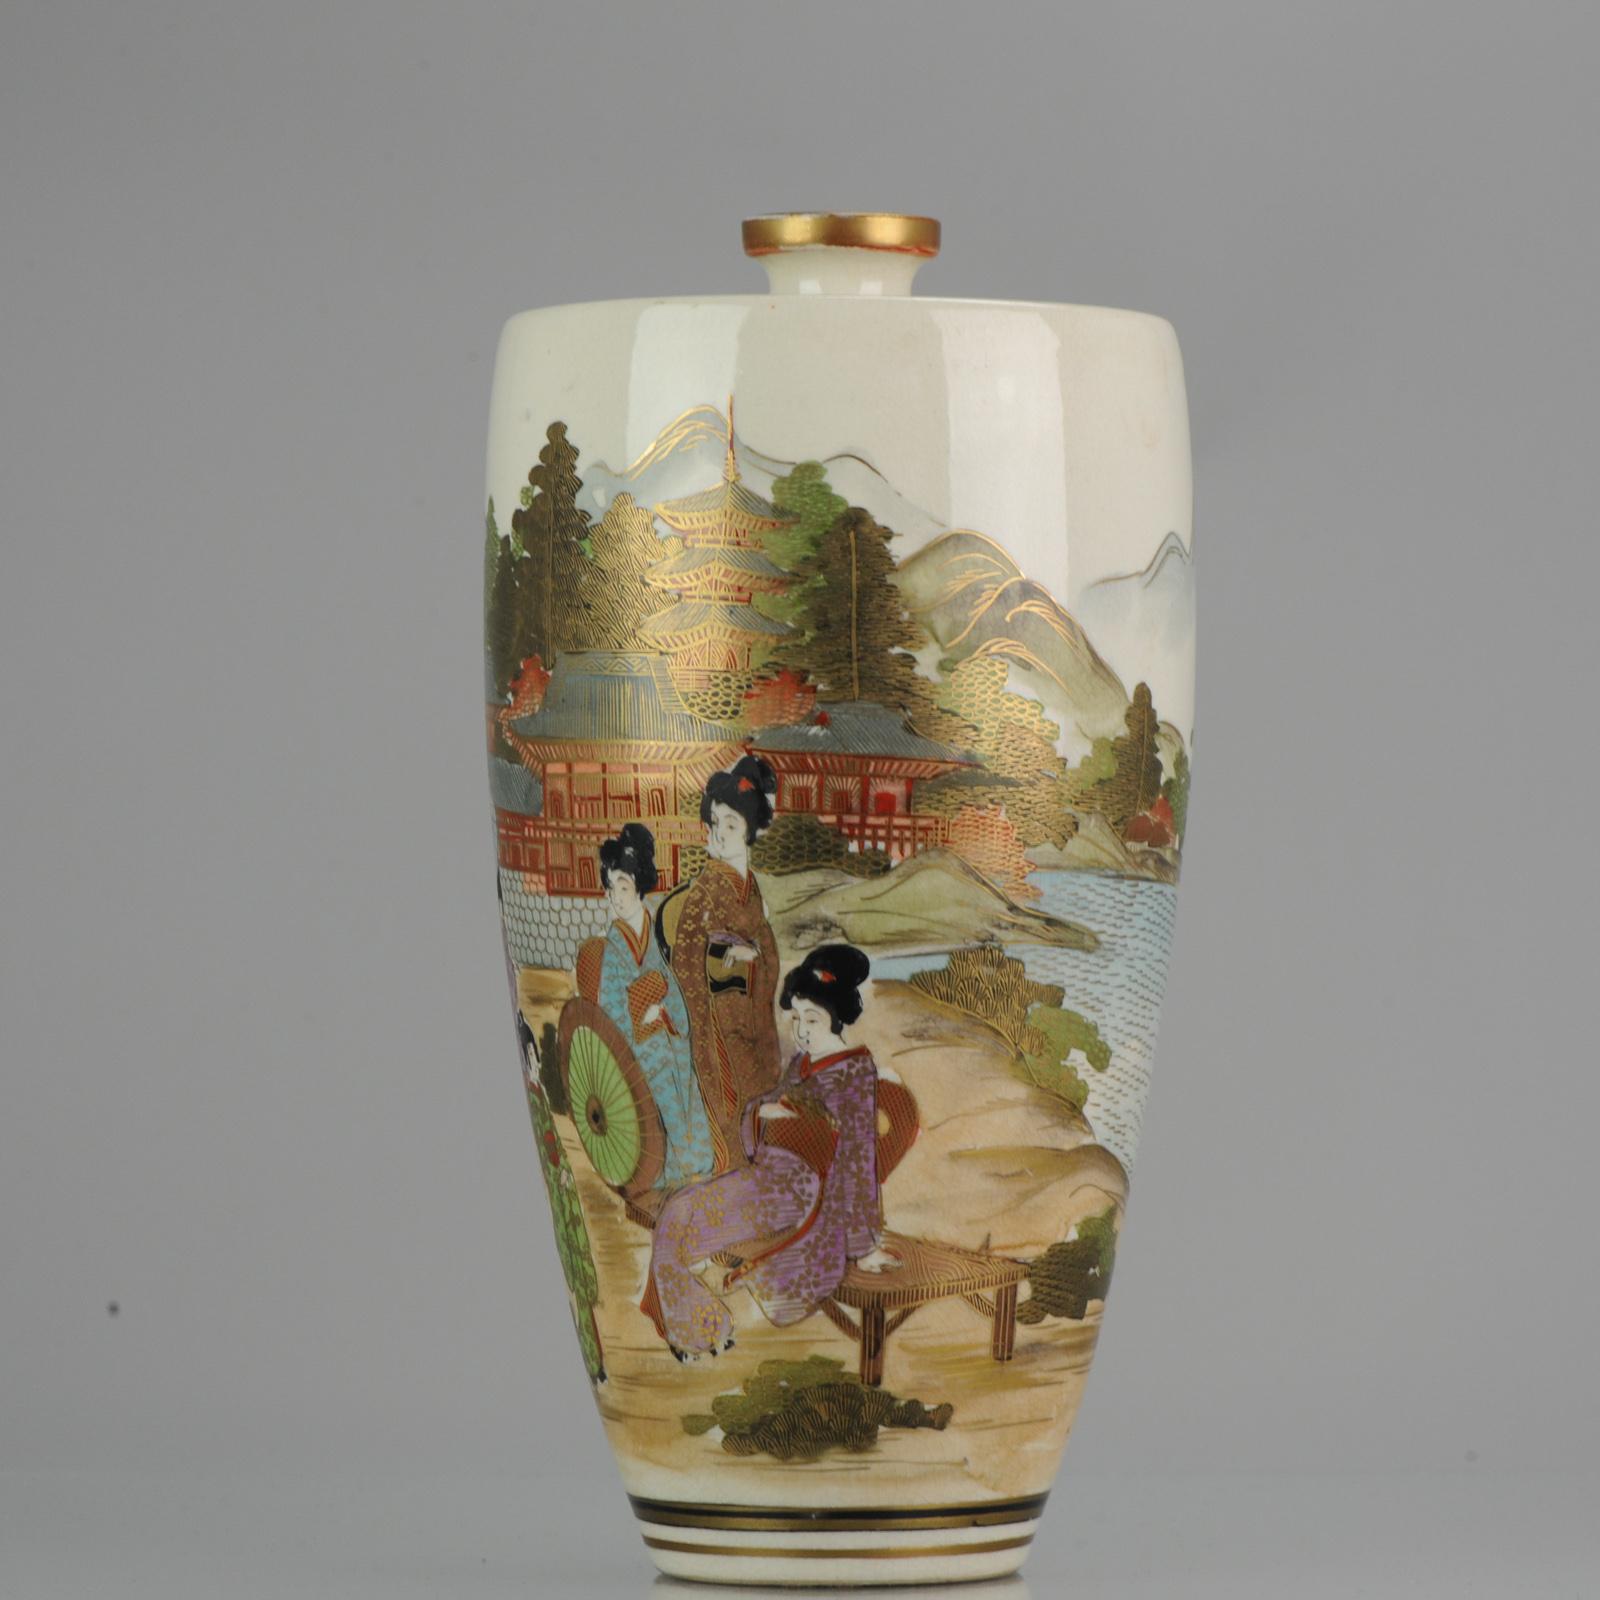 Large Antique 19-20th C Japanese Satsuma Vase Japan Meiji Period Landscape In Distressed Condition For Sale In Amsterdam, Noord Holland